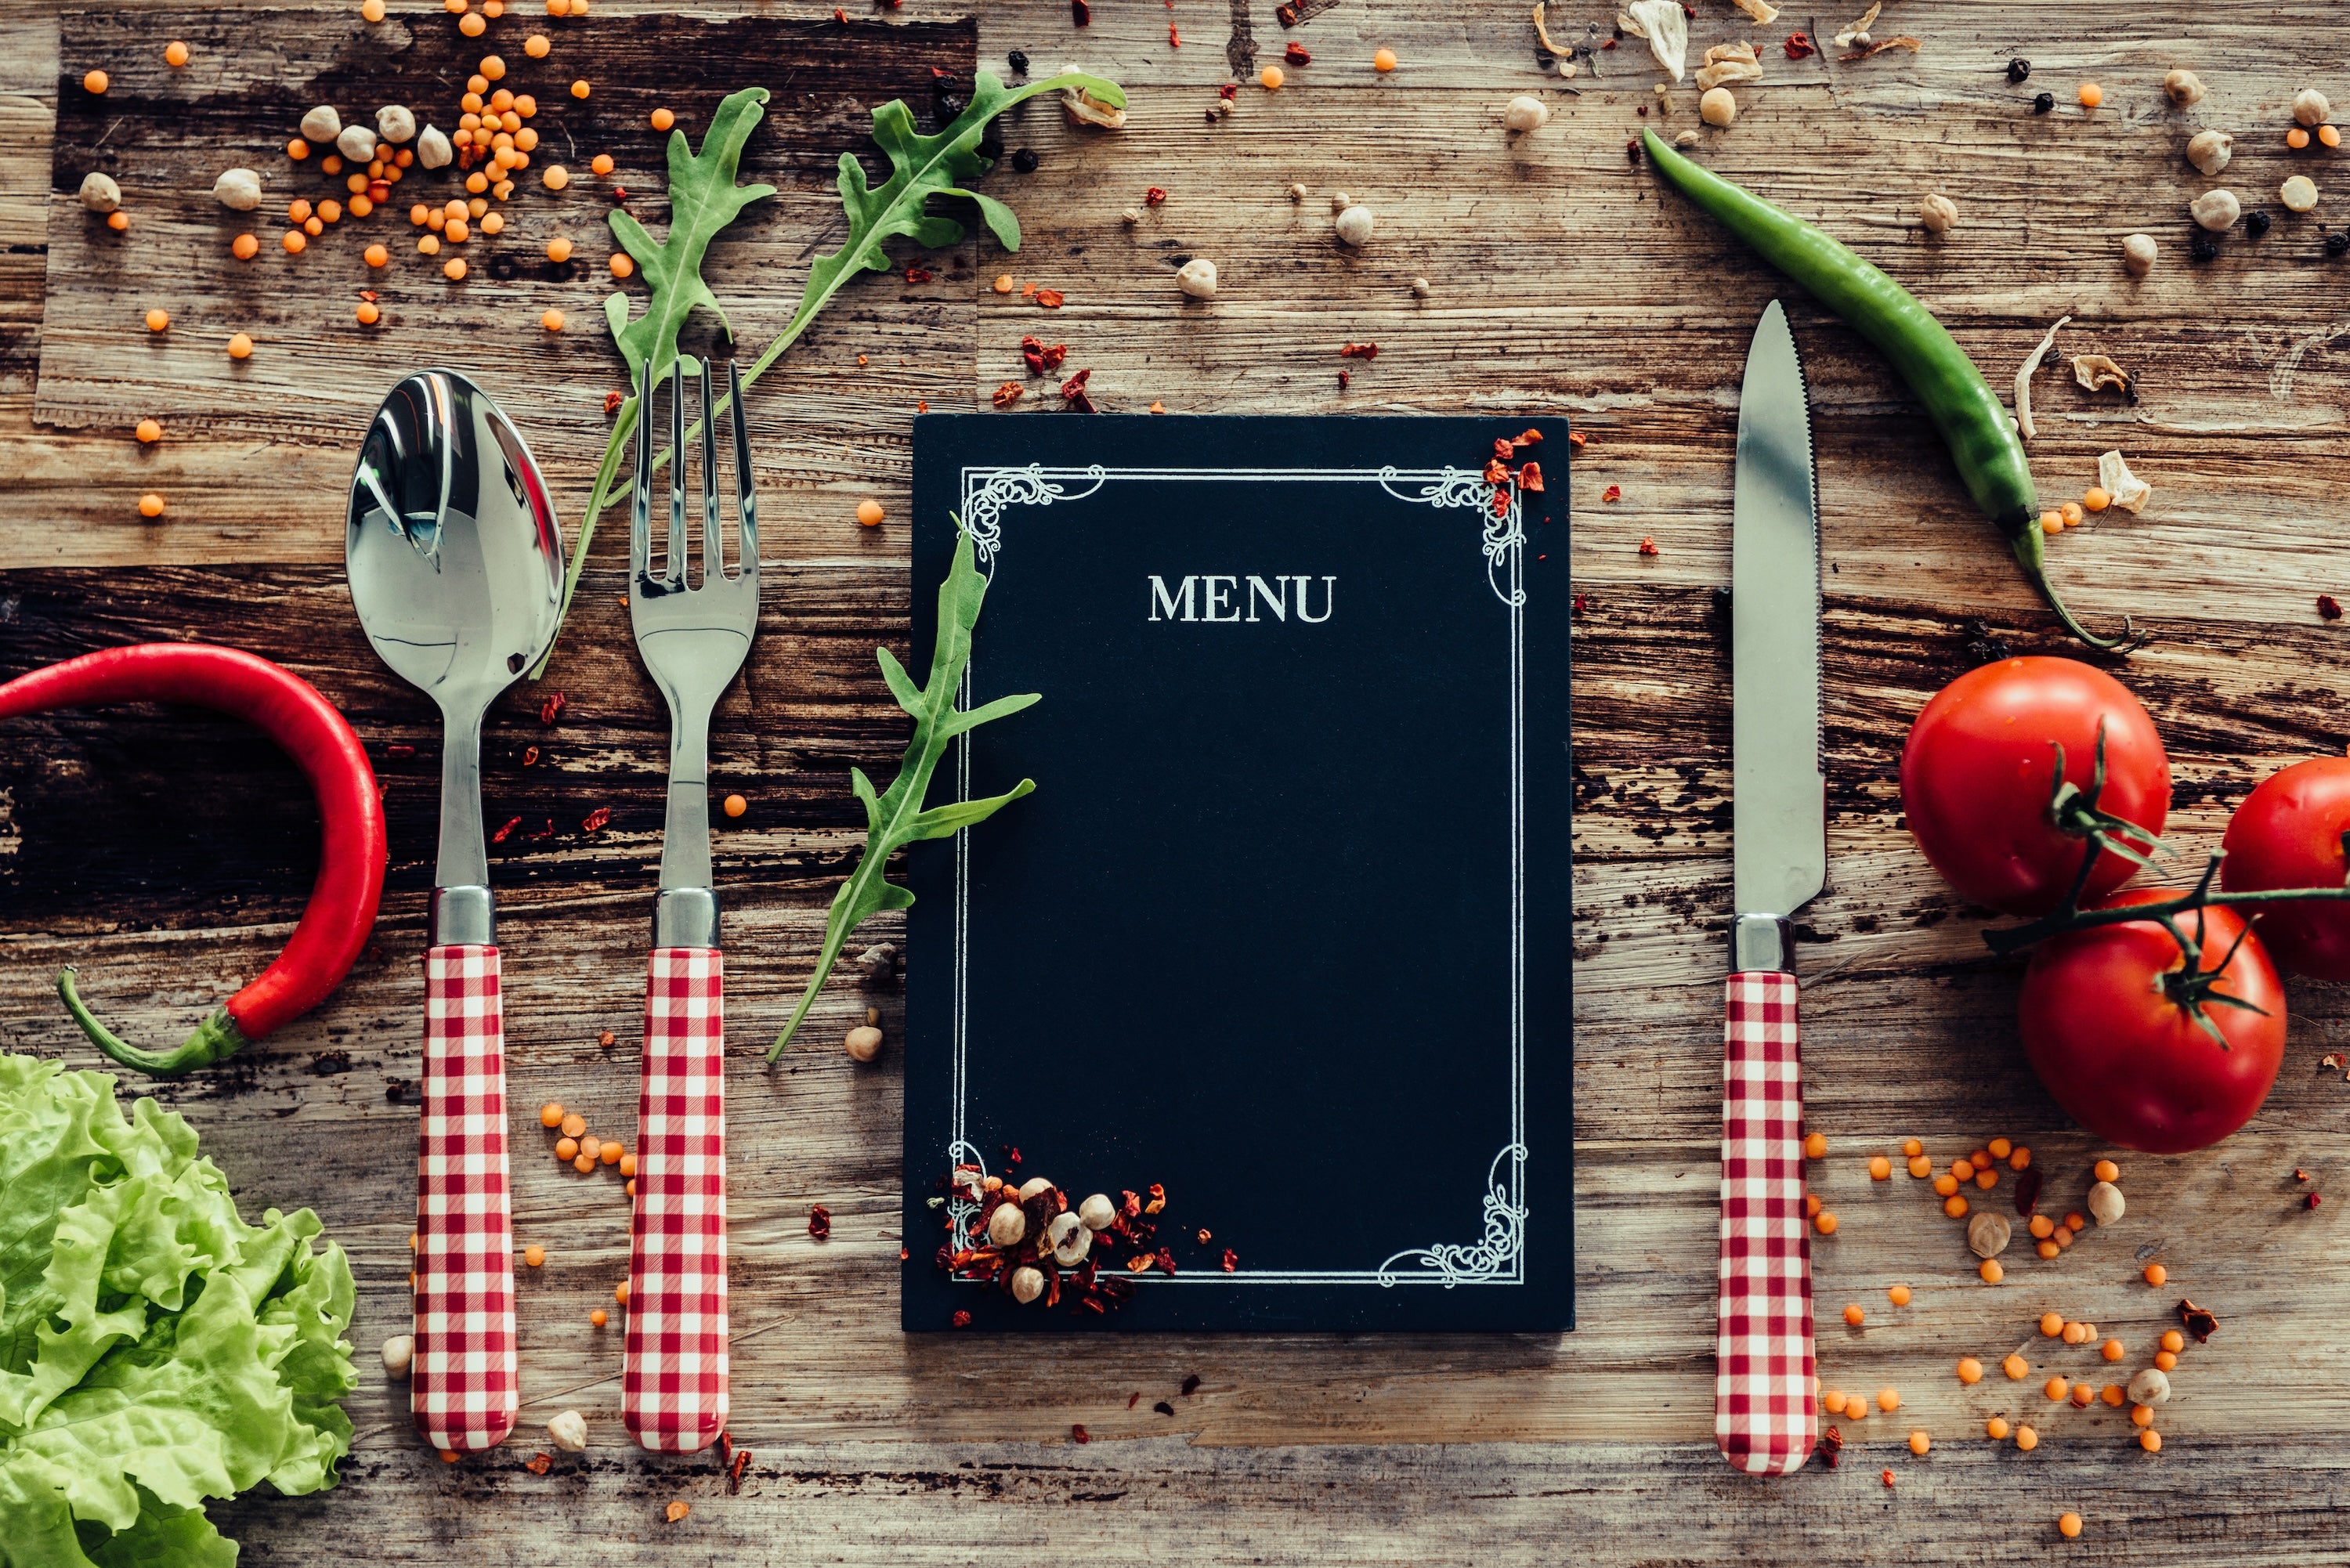 How to Evaluate Your Own Menu